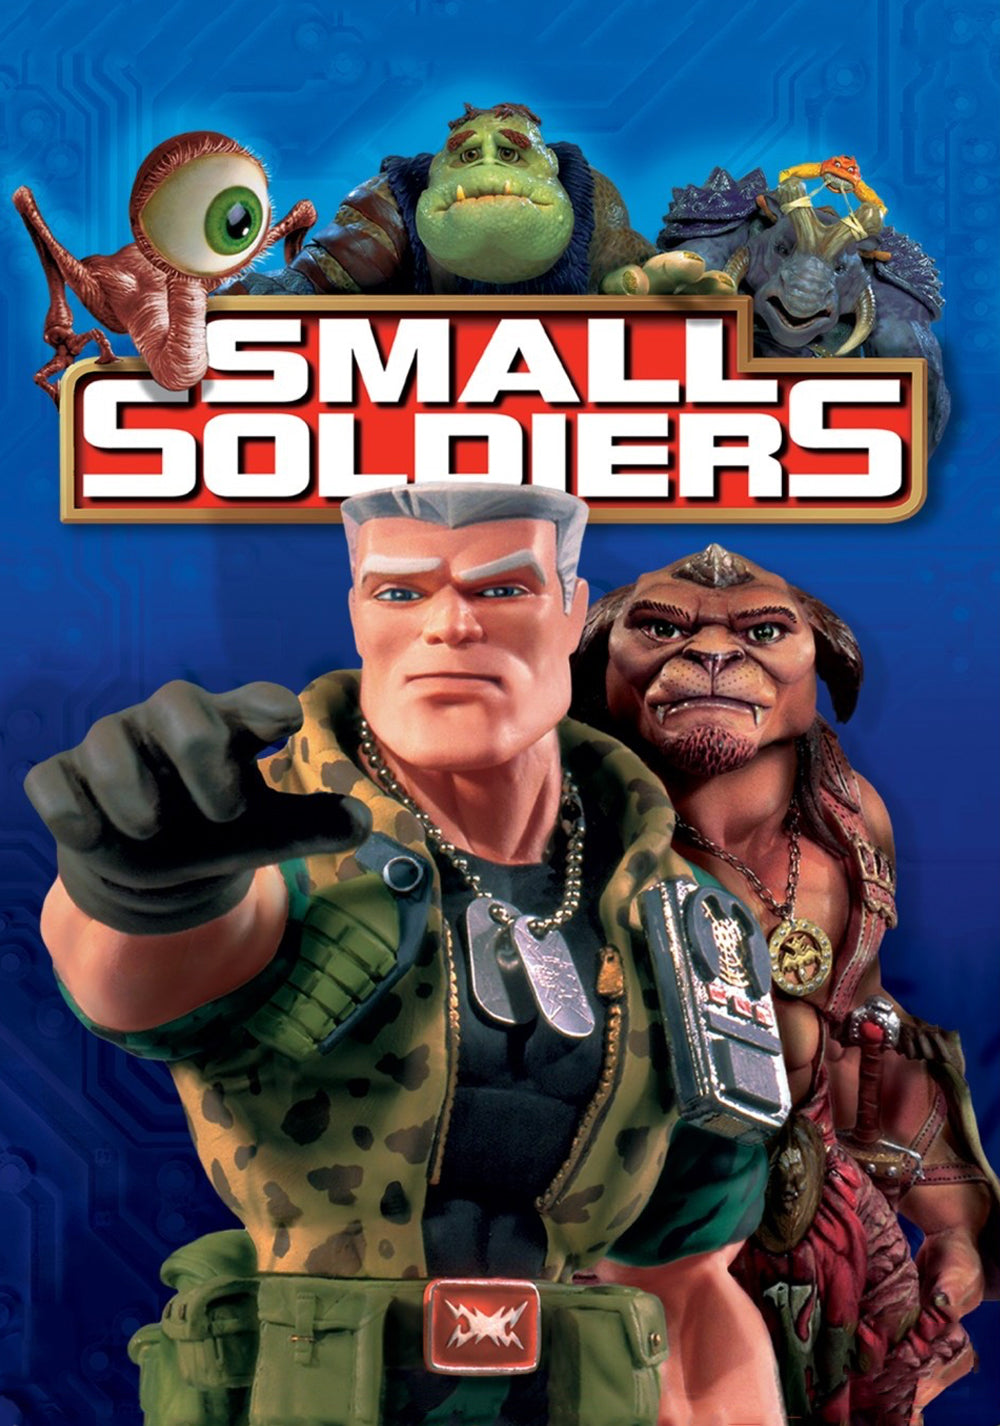 Small Soldiers VHS (1998)